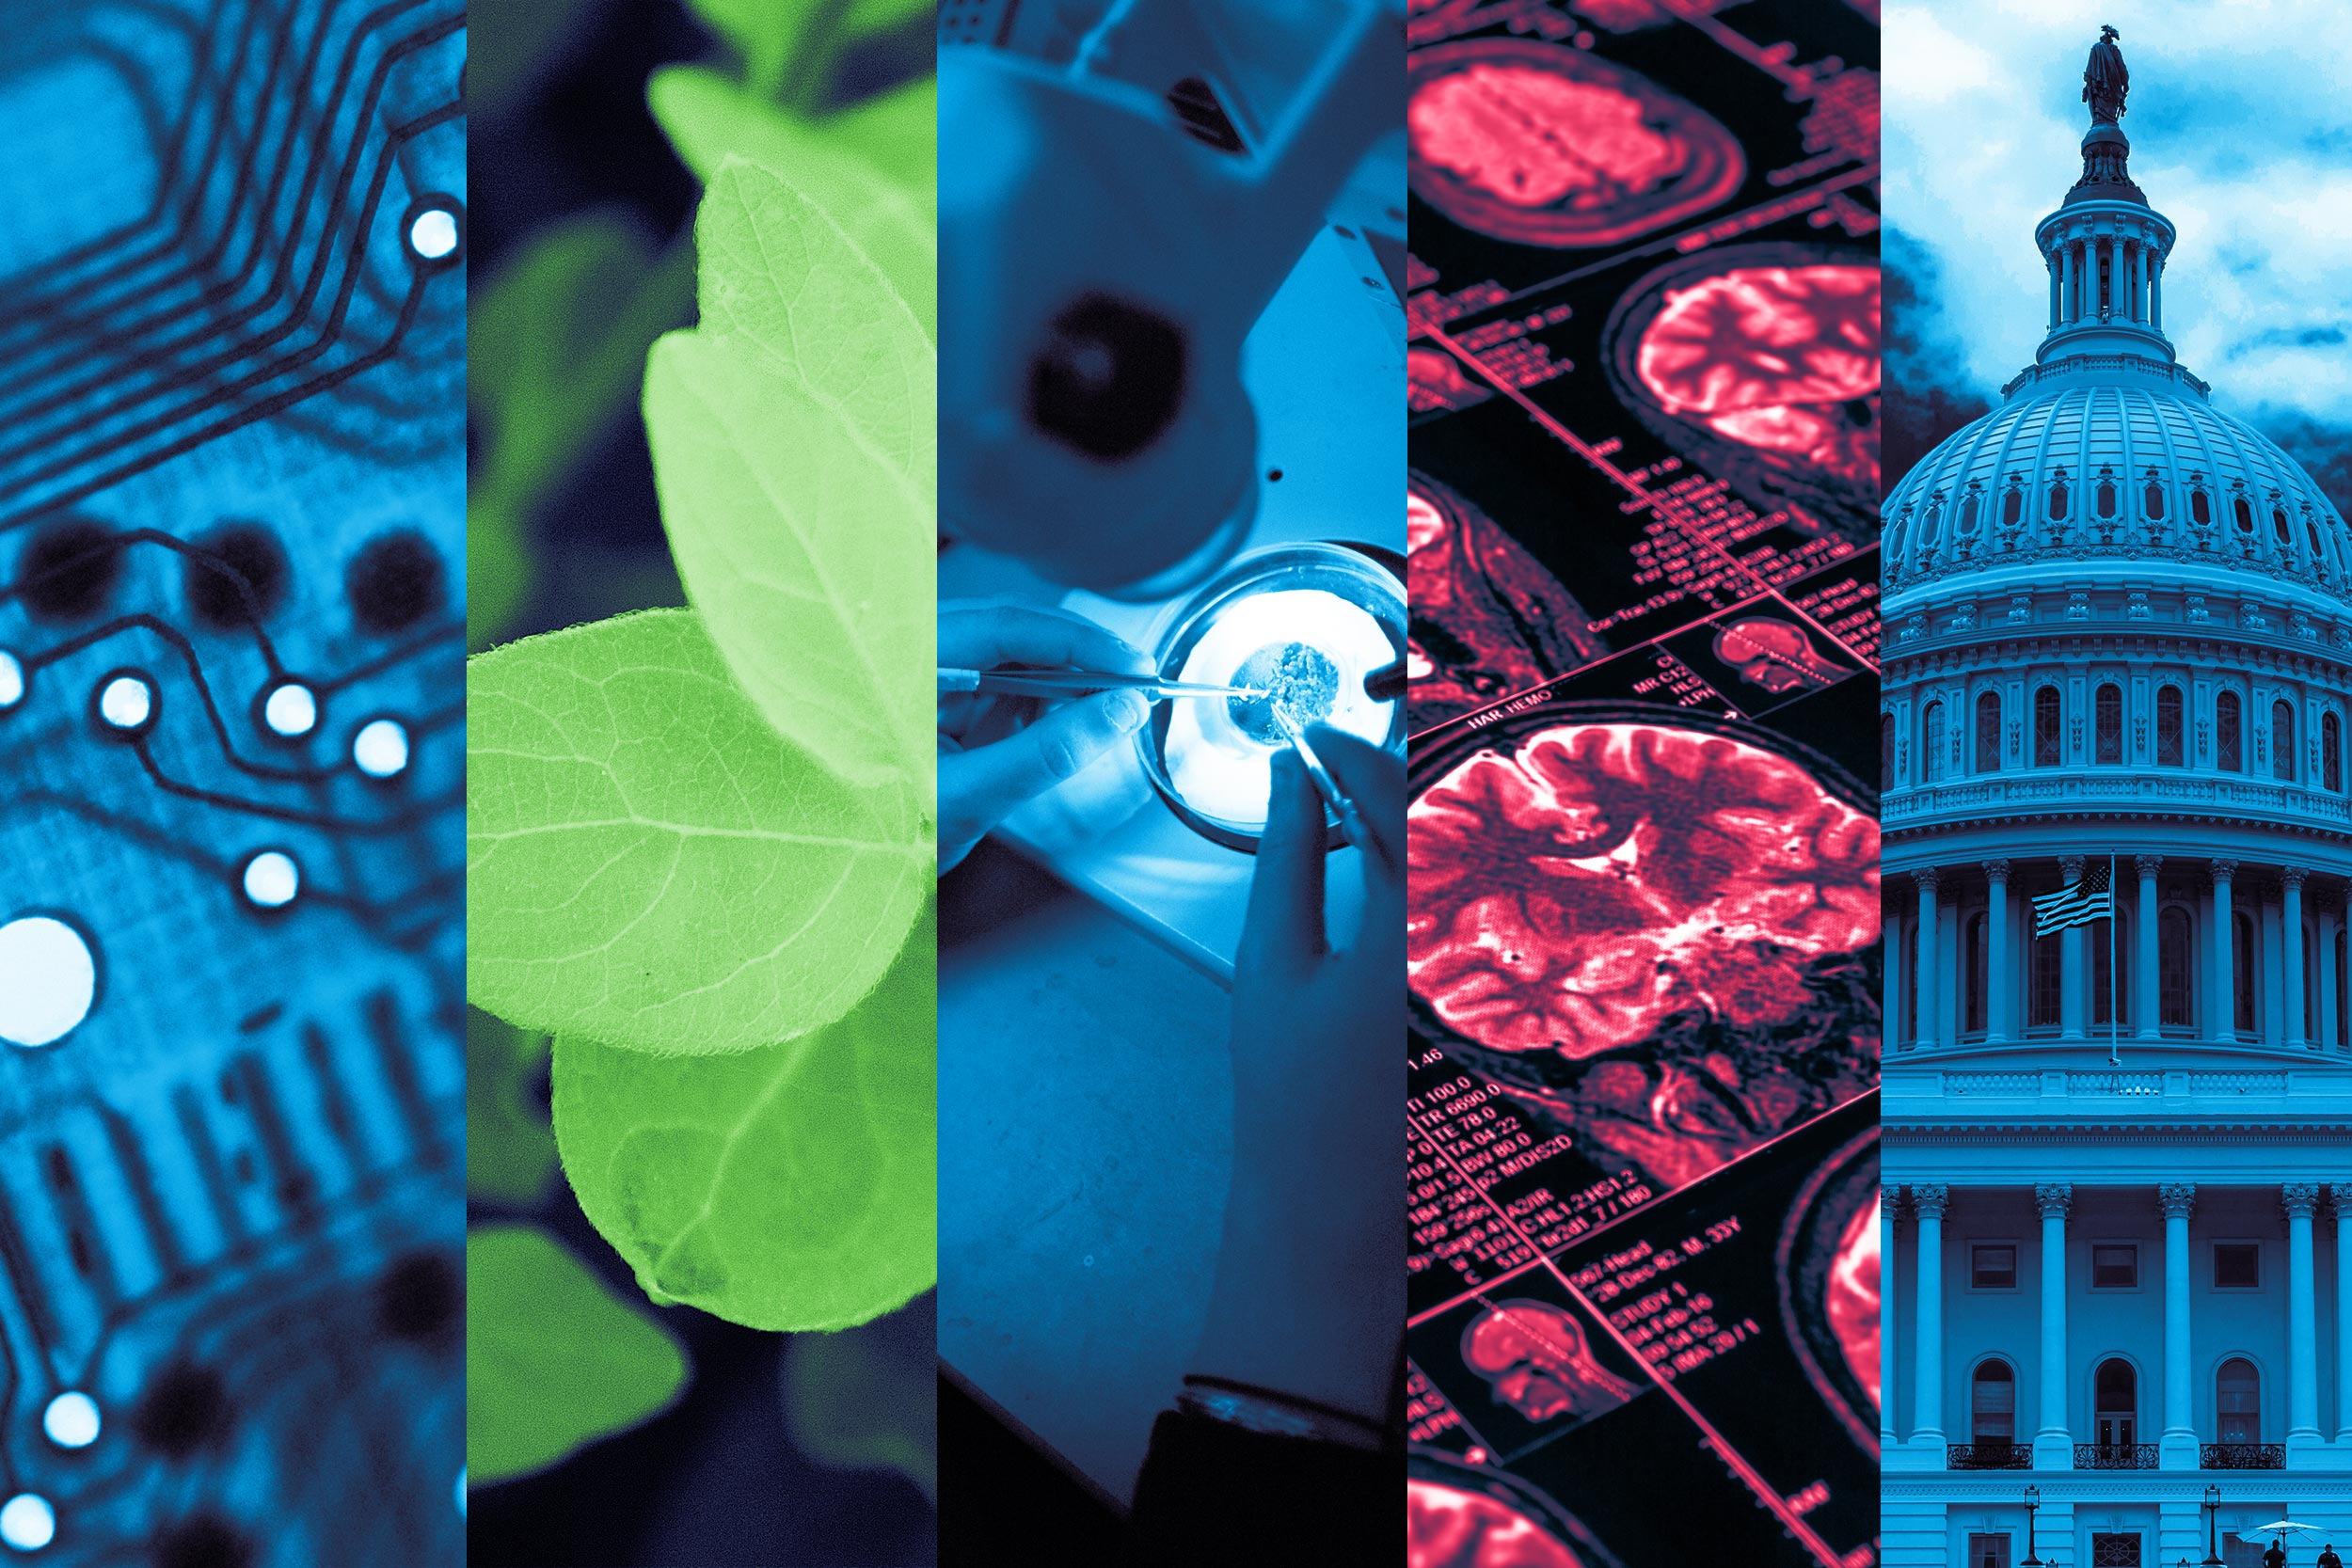 Left to right: Bioengineering cpu panel, green leaf, person working on a microscope slide, mri images, USA capitol 